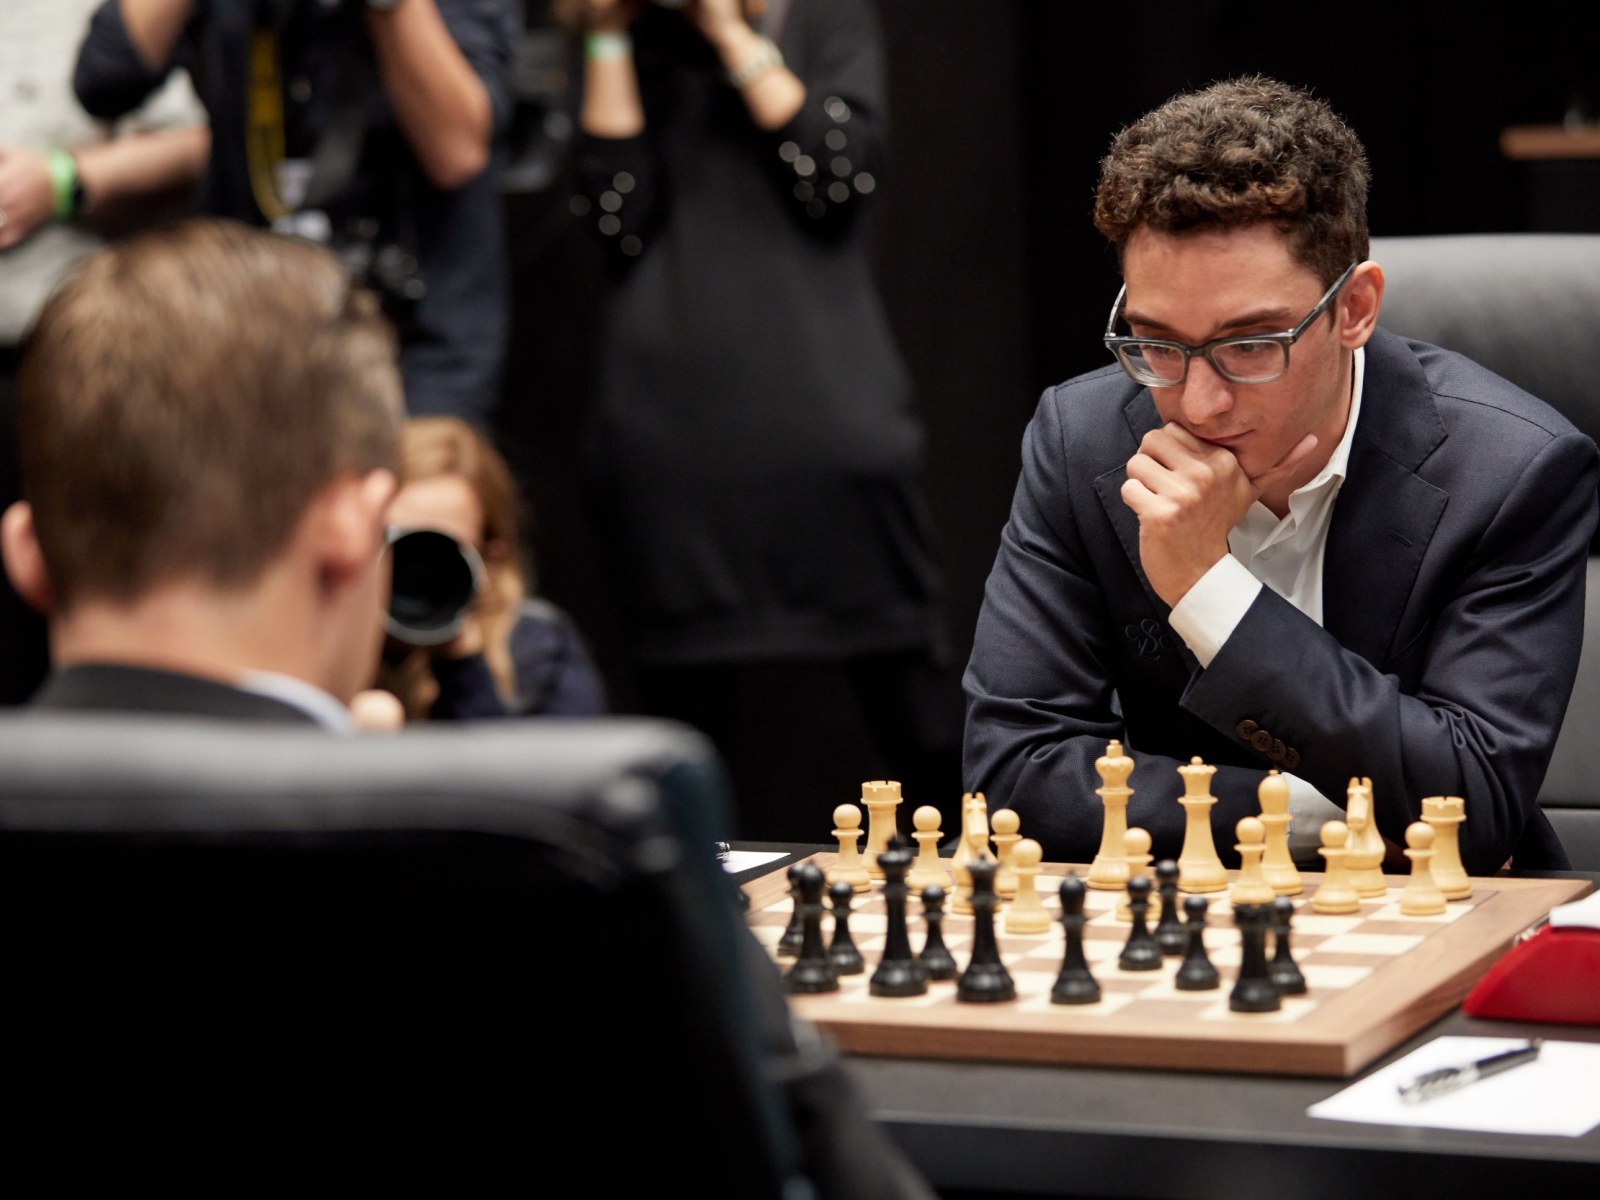 Fabiano Caruana Wins The Candidates Tournament, Becomes First American to  Challenge for World Chess Championship Title Since Bobby Fischer in 1972